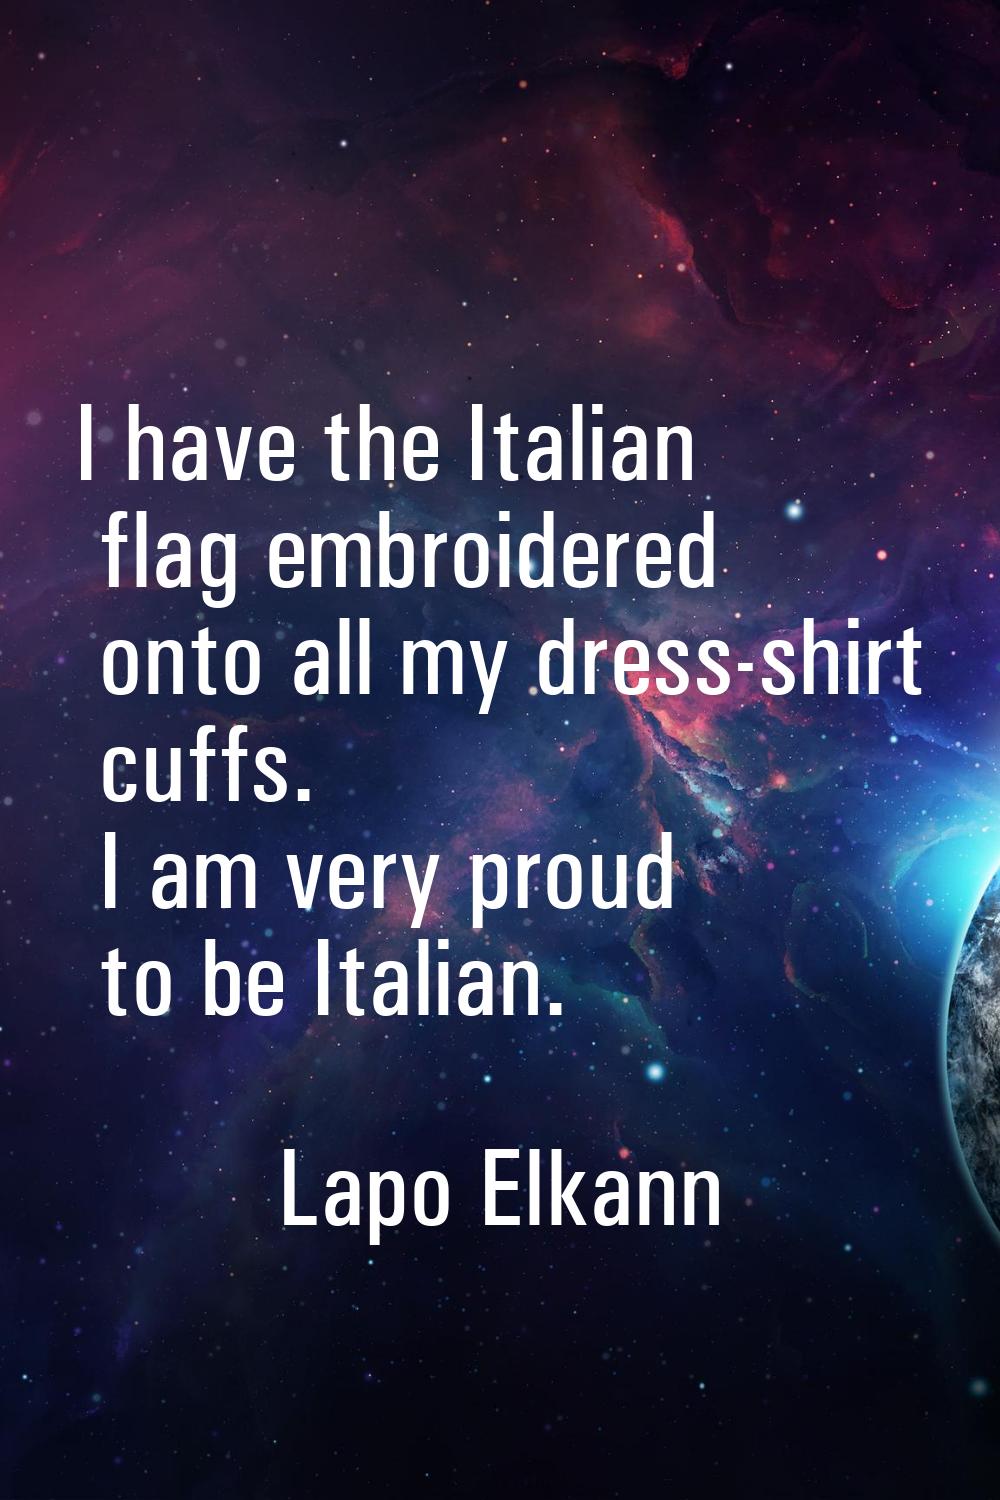 I have the Italian flag embroidered onto all my dress-shirt cuffs. I am very proud to be Italian.